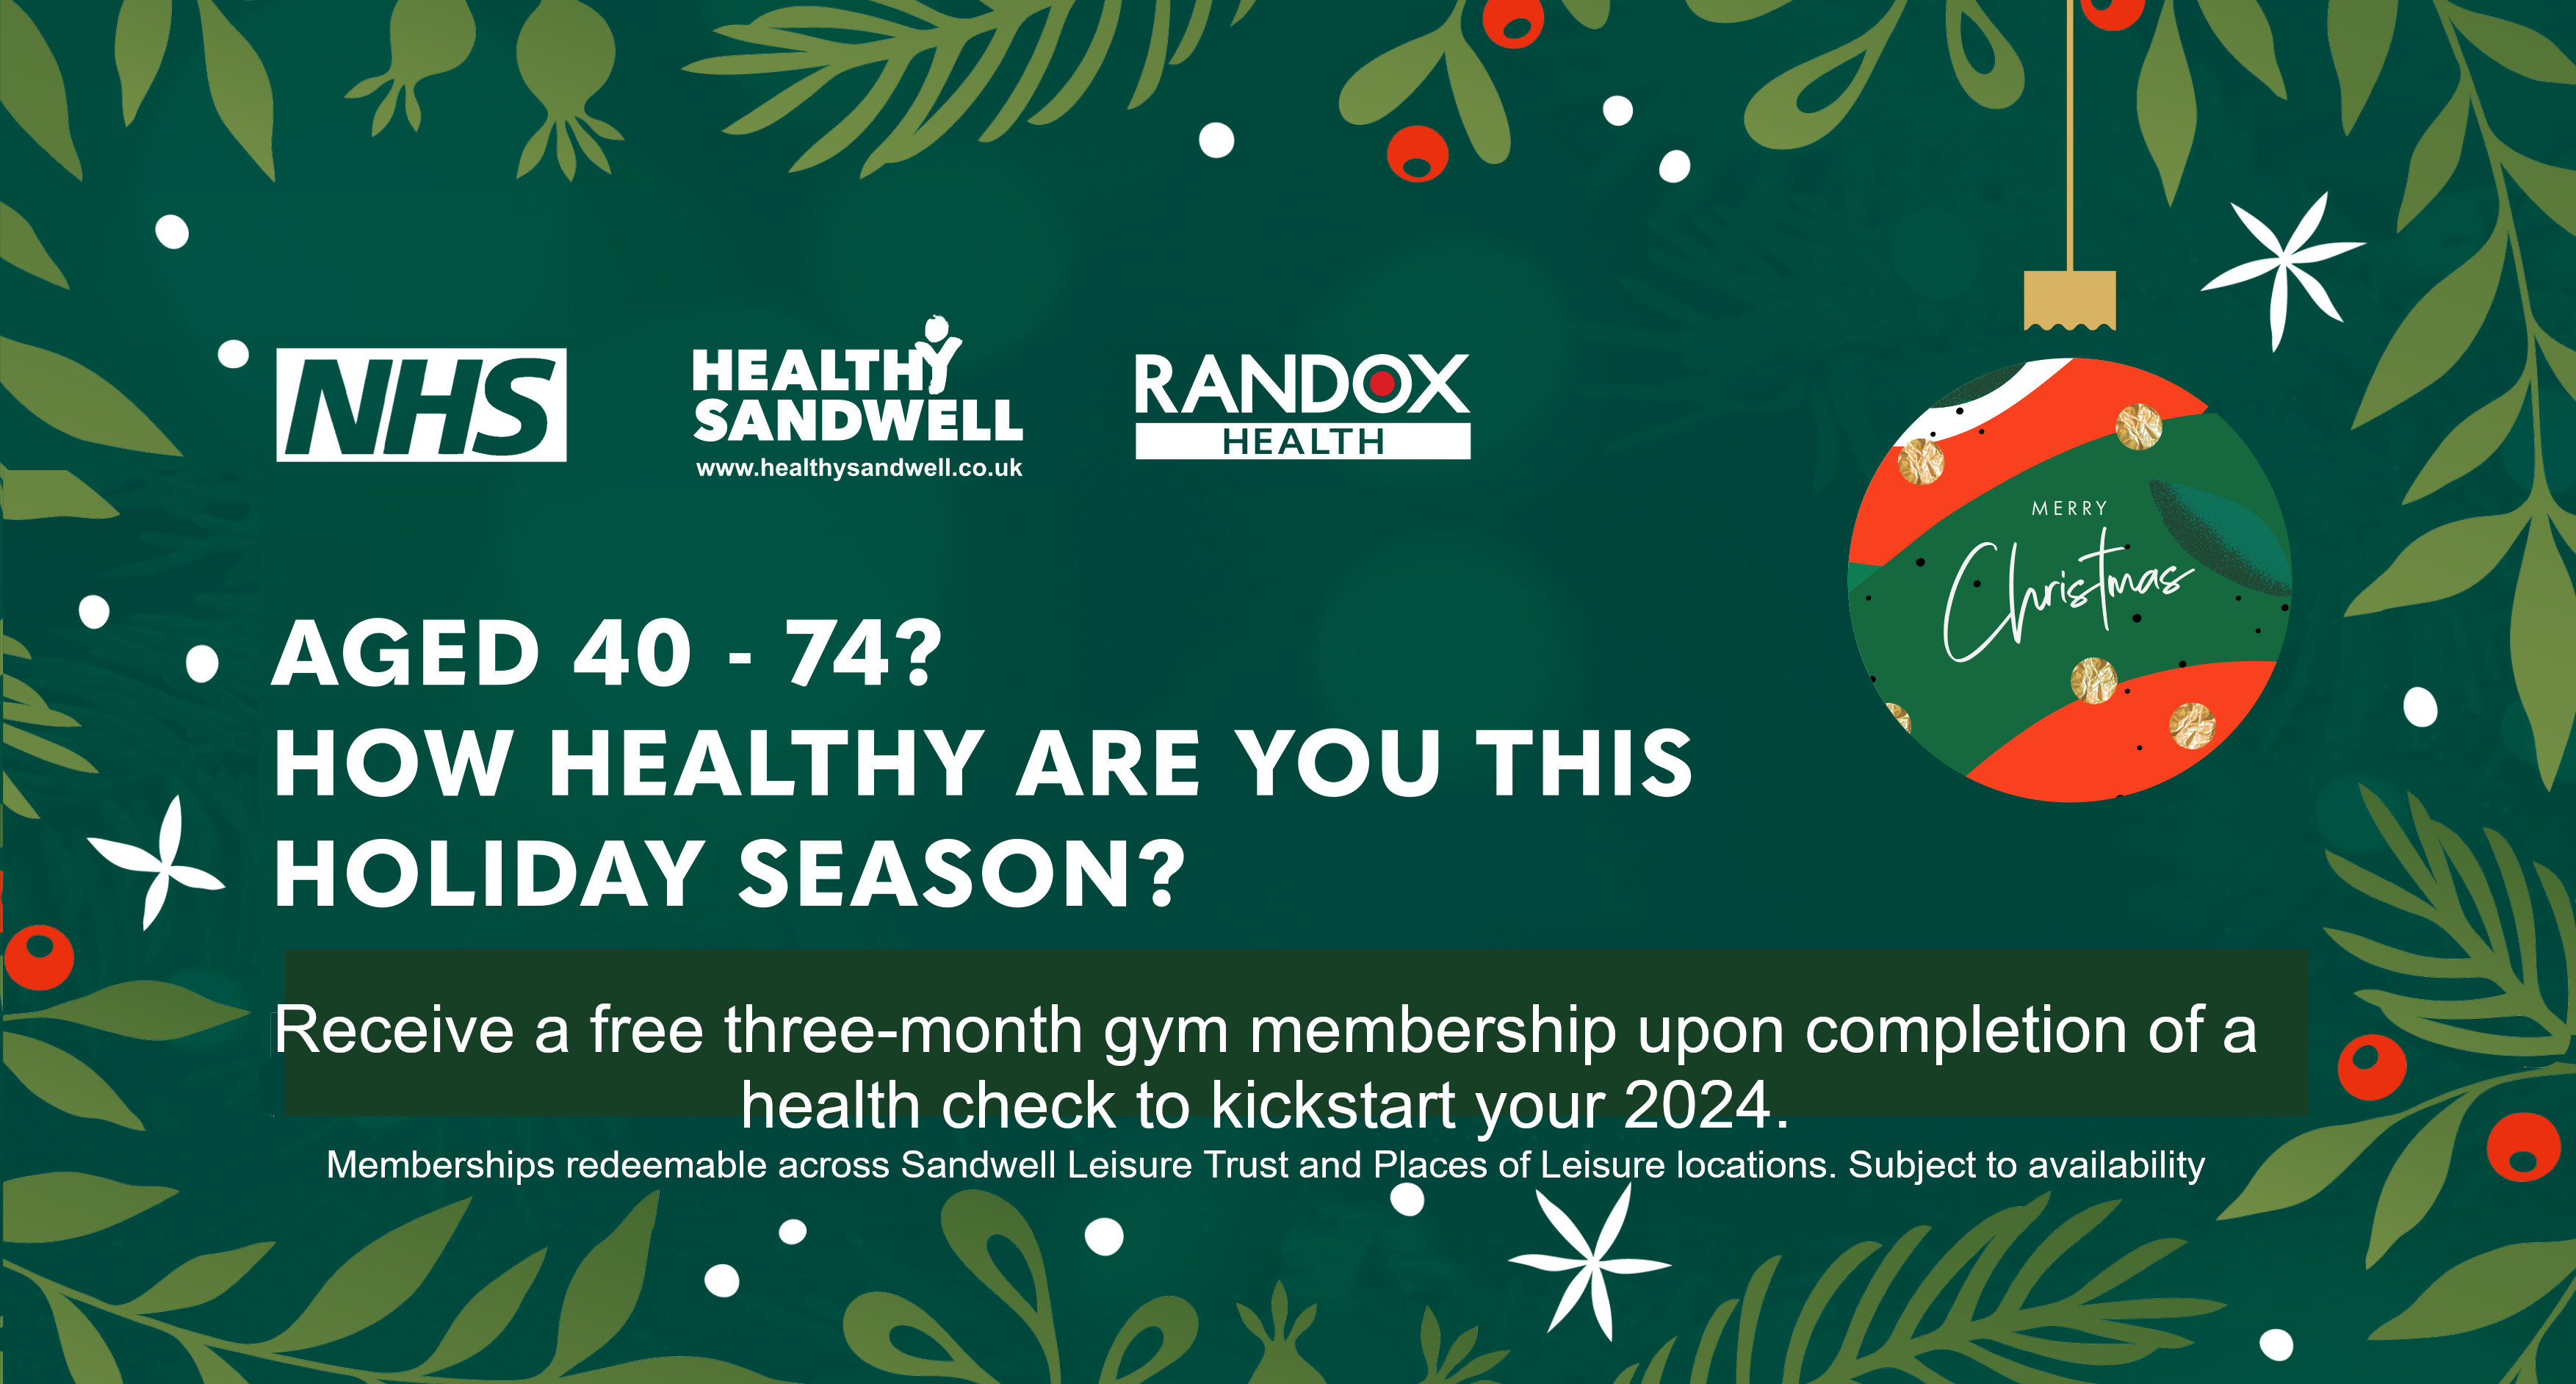 AGED 40 - 74? HOW HEALTHY ARE YOU THIS HOLIDAY SEASON? Receive a free three-month gym membership upon completion of a health check to kickstart your 2024. Memberships redeemable across Sandwell Leisure Trust and Places of Leisure locations. Subject to availability